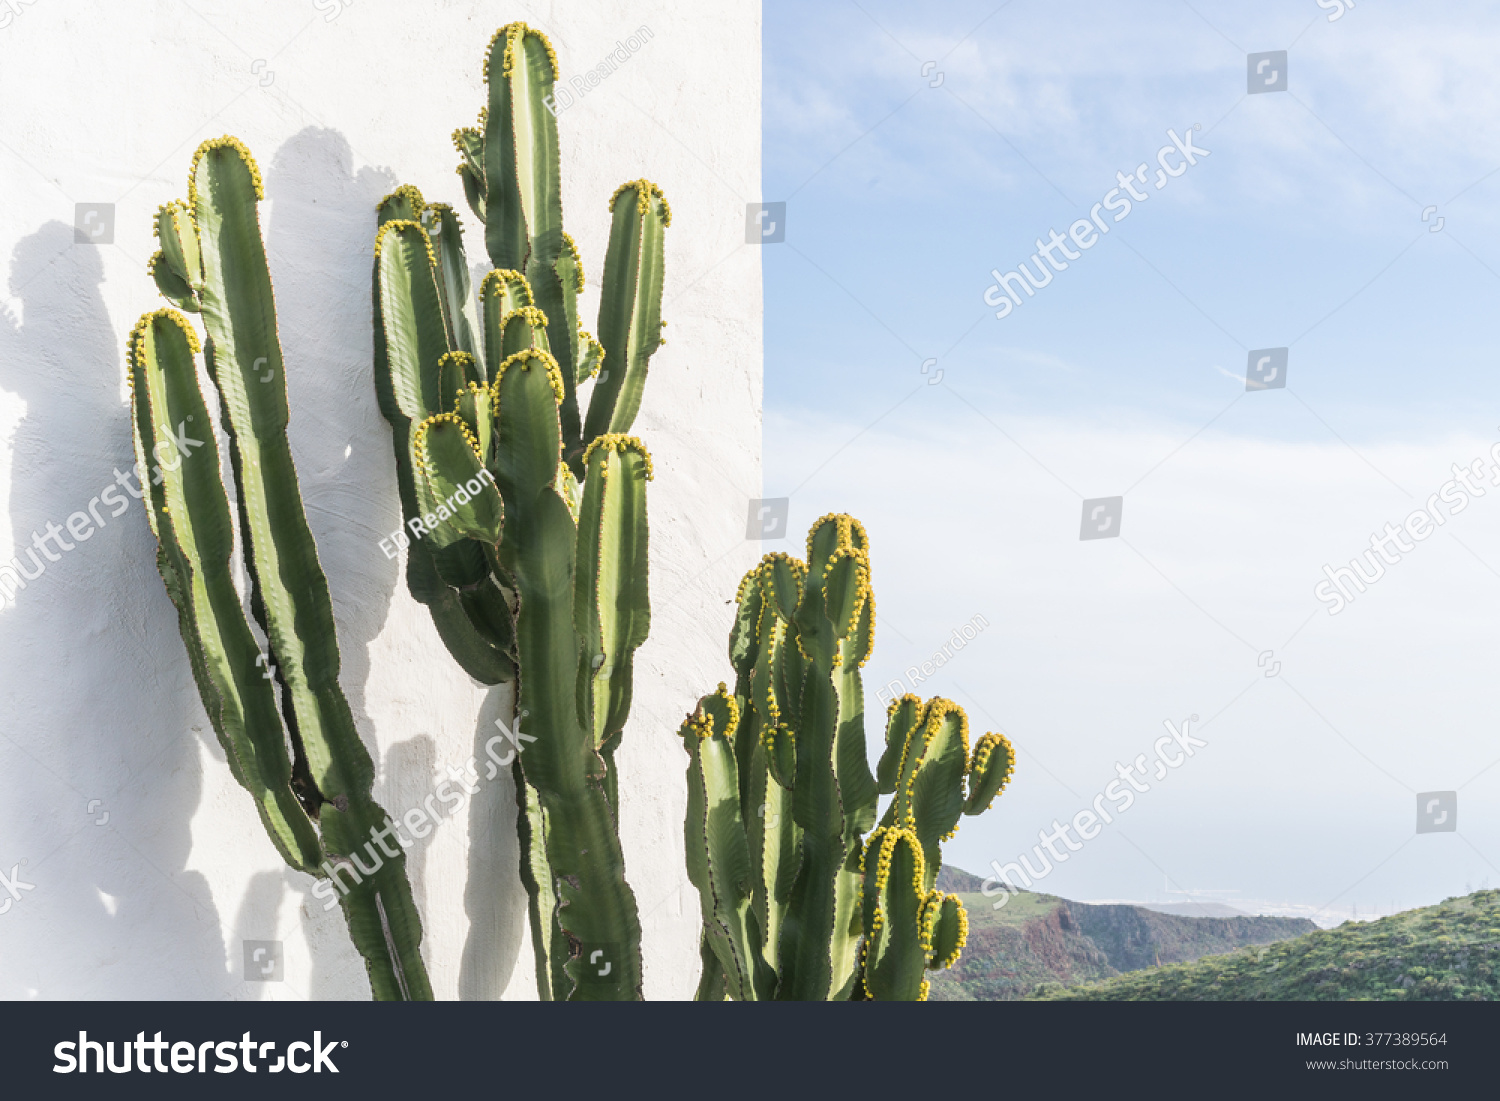 DETAIL VIEW OF THE CARDON CACTUS IN SUMMER WITH RICH BLUE GREEN AND TURQUOISE COLORS AND SKY IN THE BACKGROUND AND WHITE RENDERED PLASTER WALL #377389564